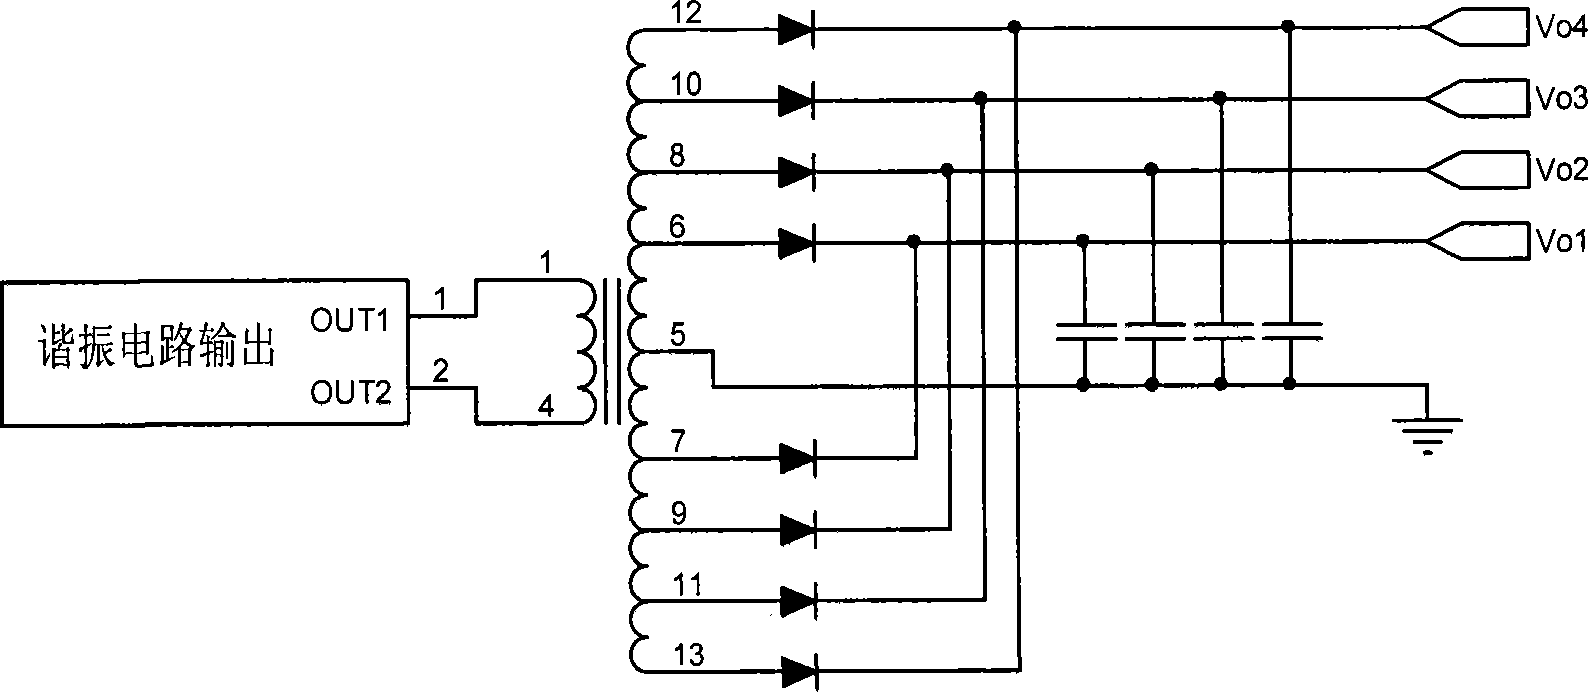 An implementation method and circuit for low voltage output loop of plasma TV power supply